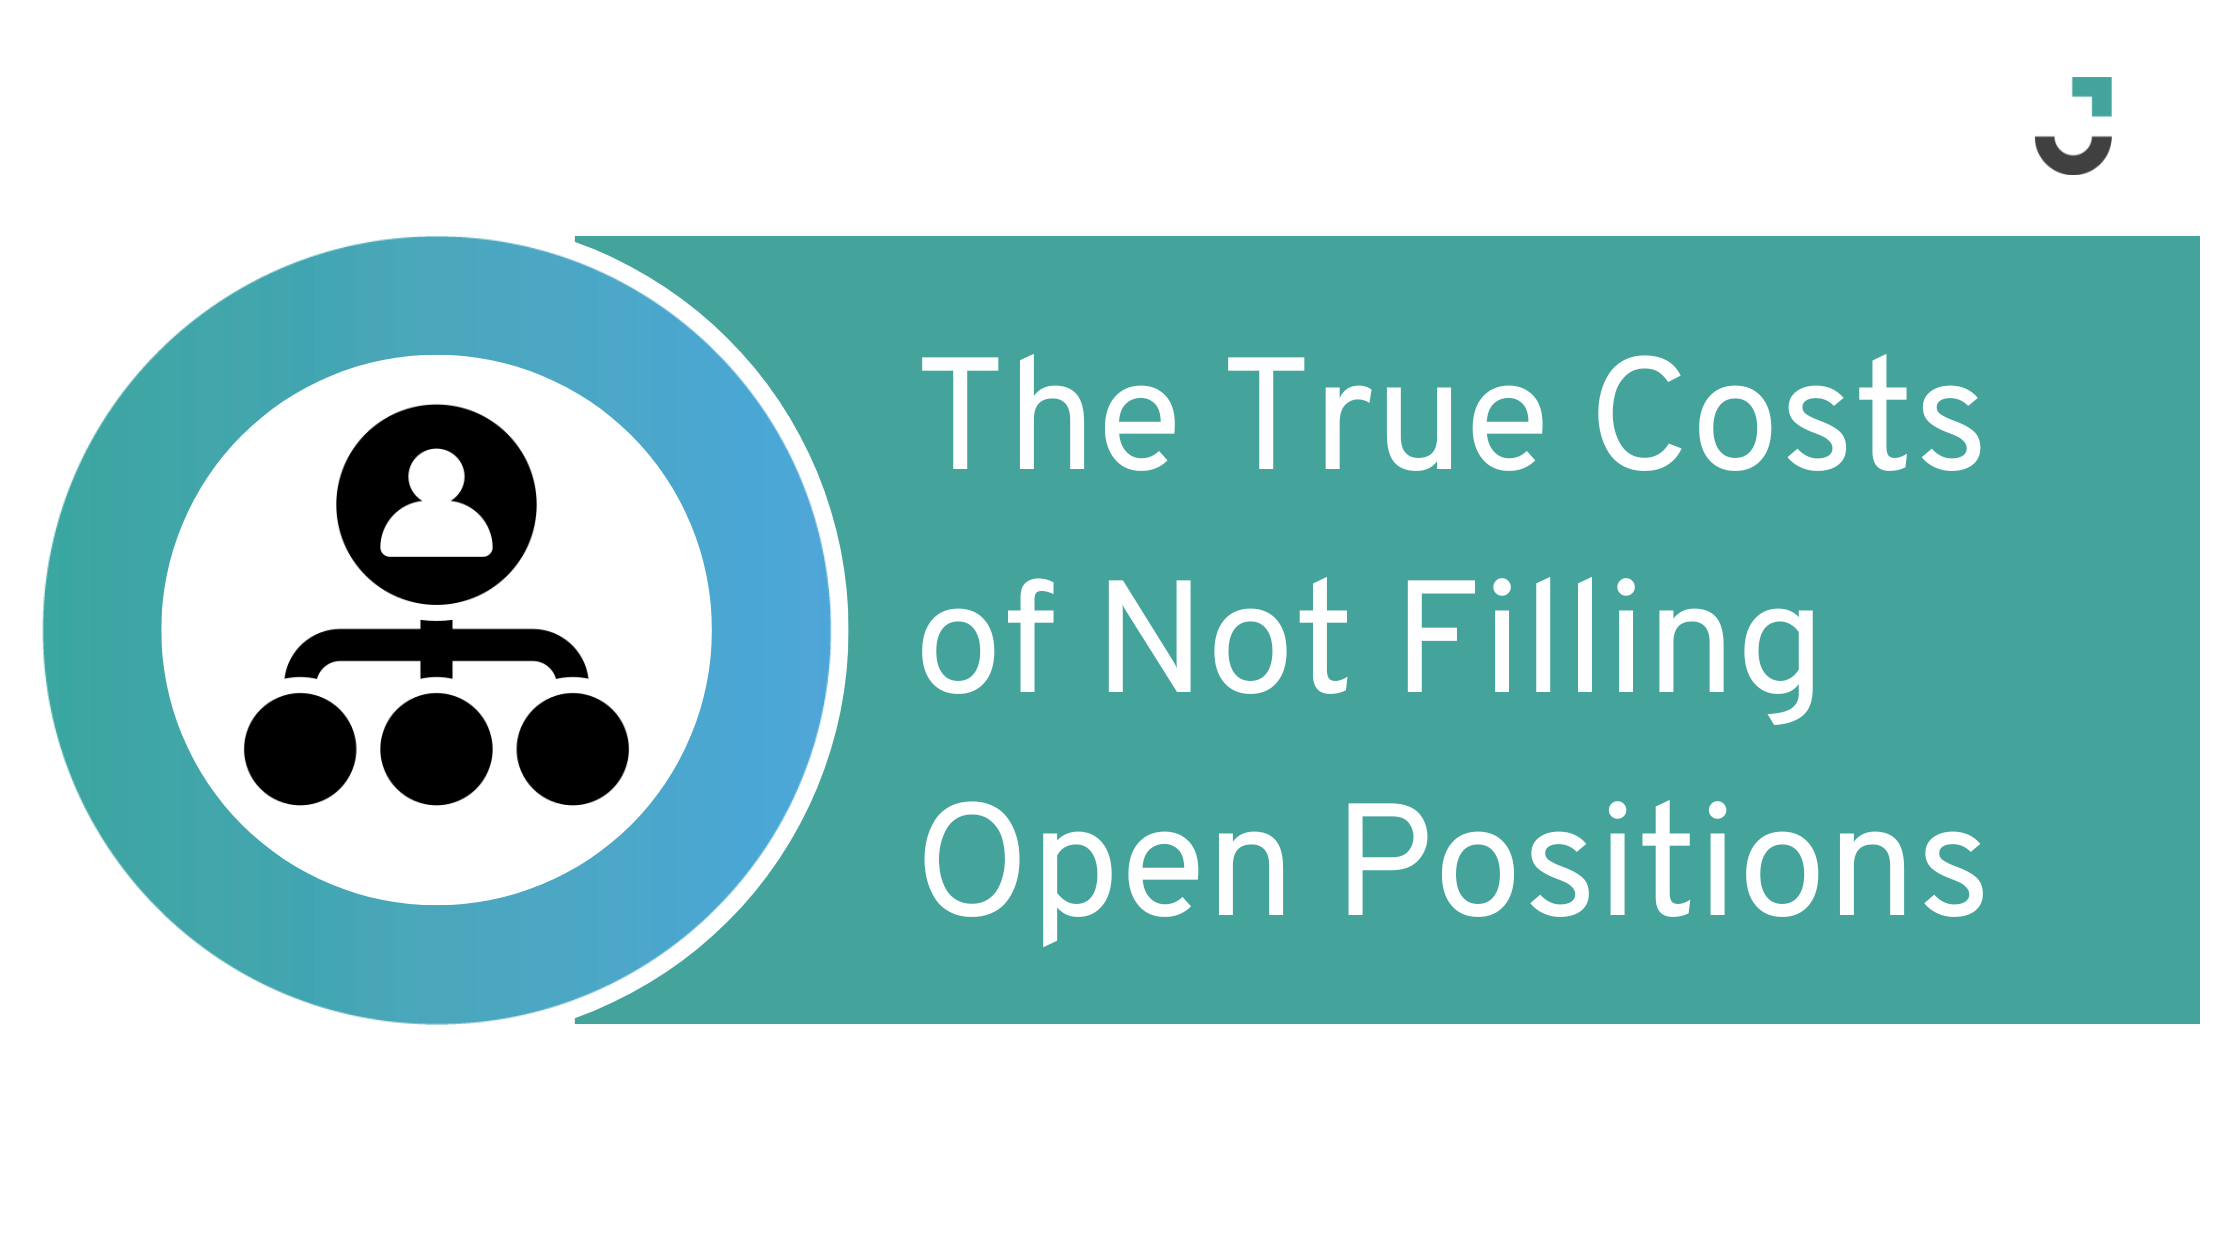 The True Costs of Not Filling Open Positions